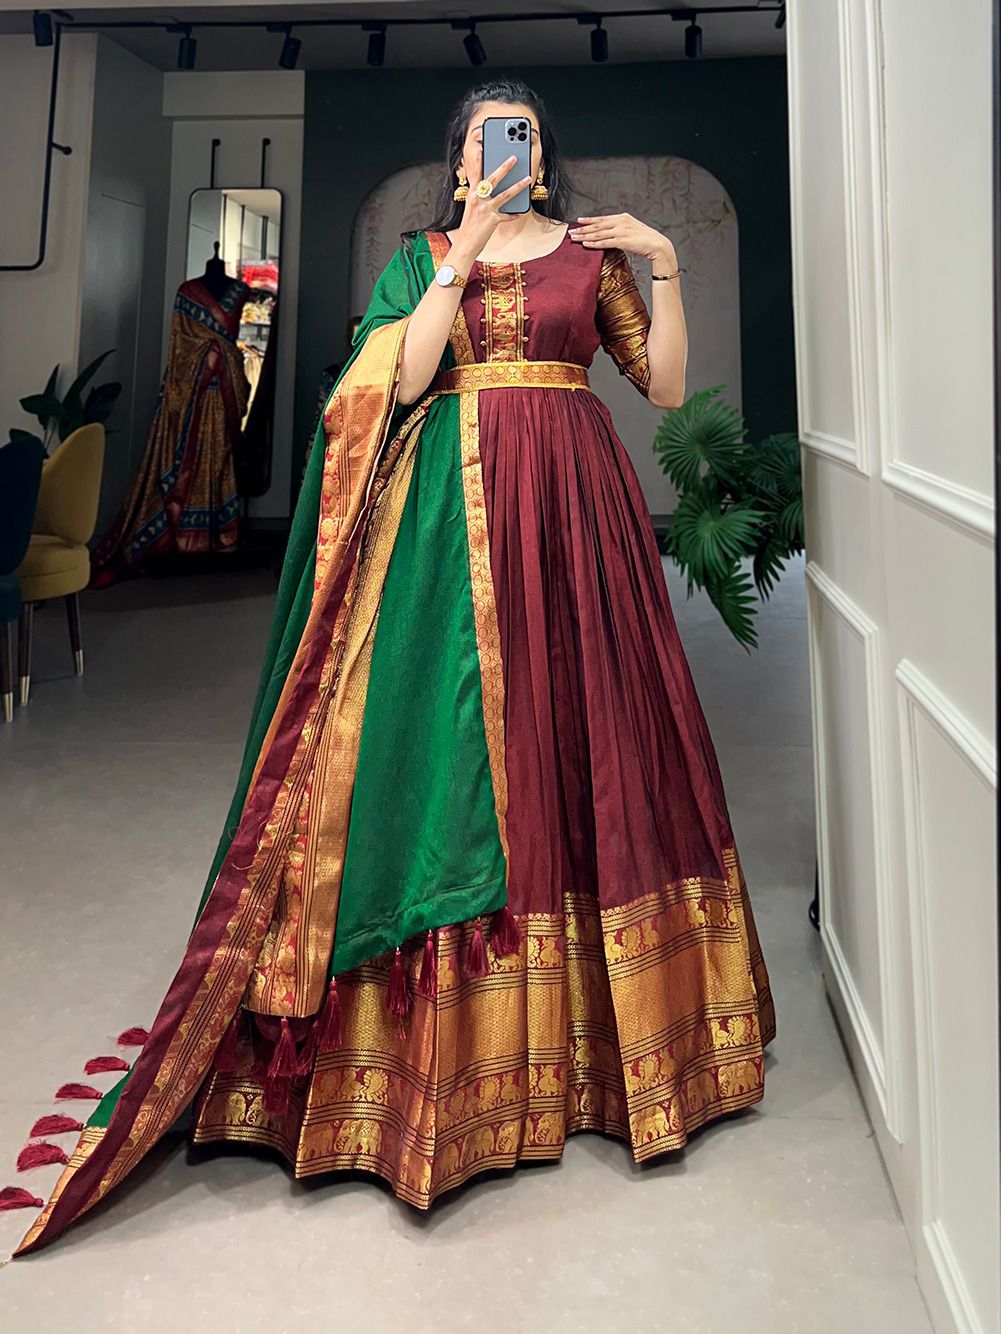 Women's Rayon Ethnic Gown With Dupatta, Women Gown, Gown Frock, Simple Gown,  Ladies Gown Suit, महिलाओं का लबादा - PR Retail, Durgapur | ID: 25927487233